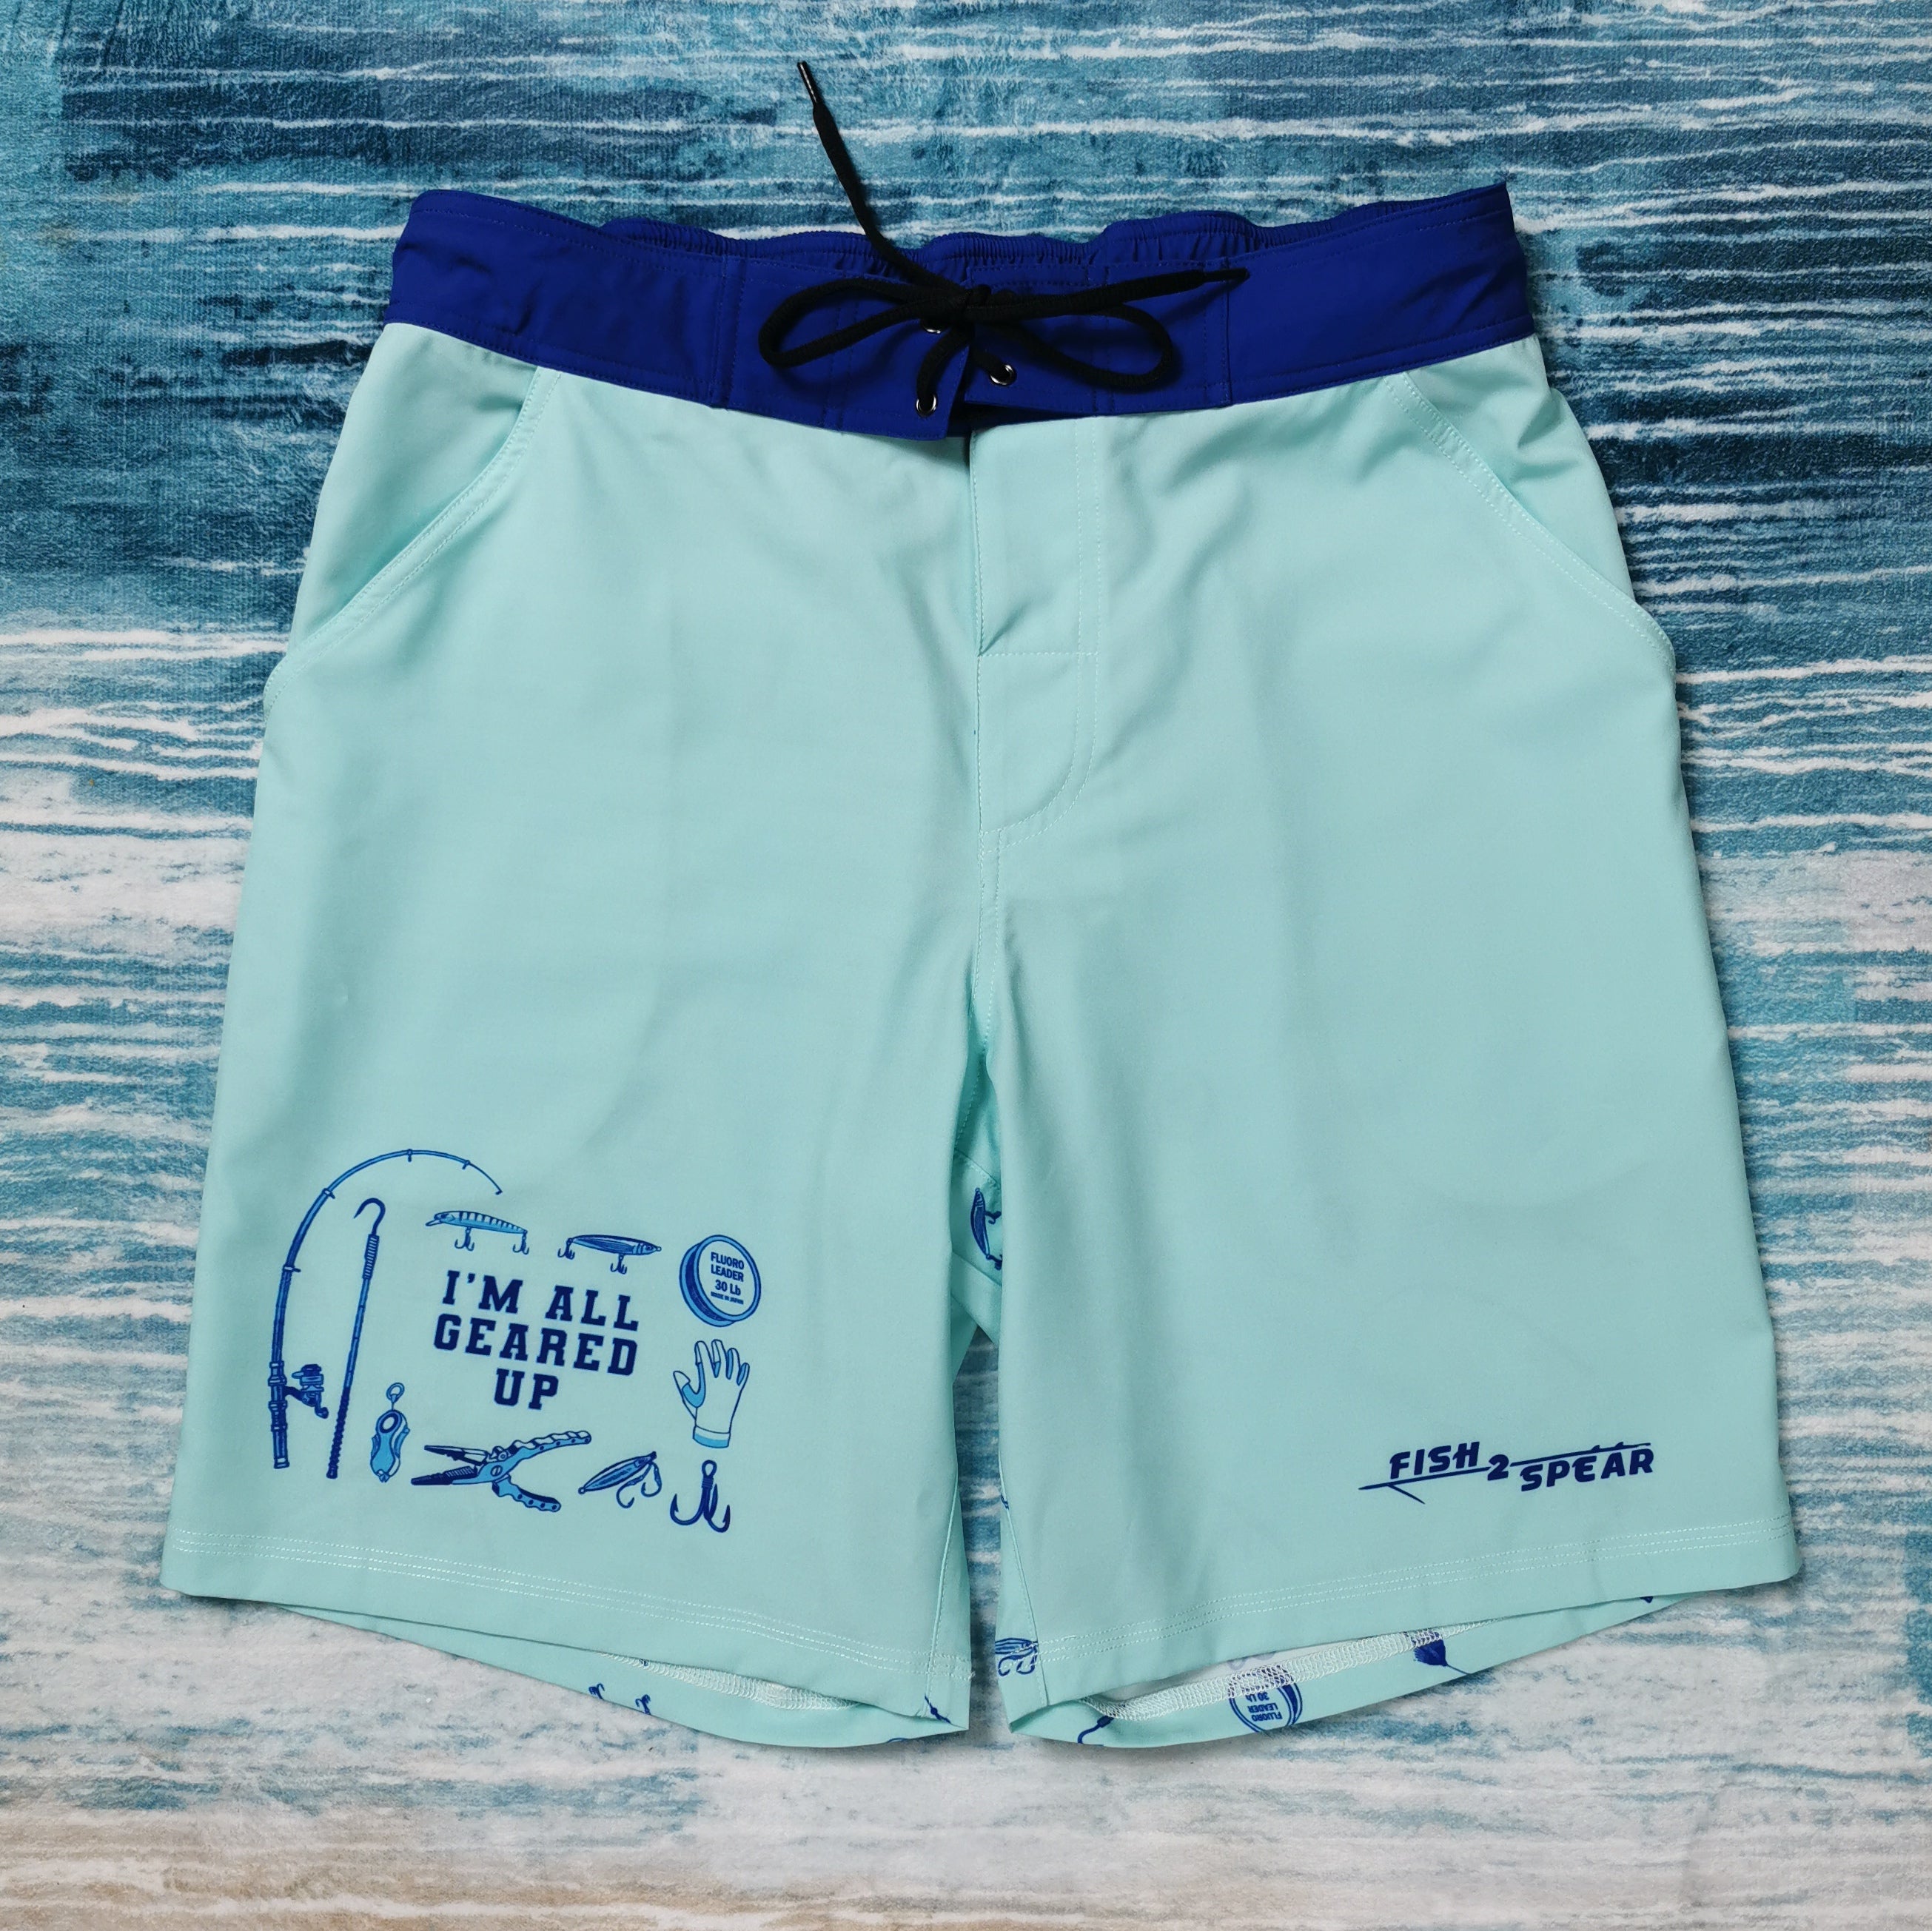 All Geared Up - Fishing Shorts